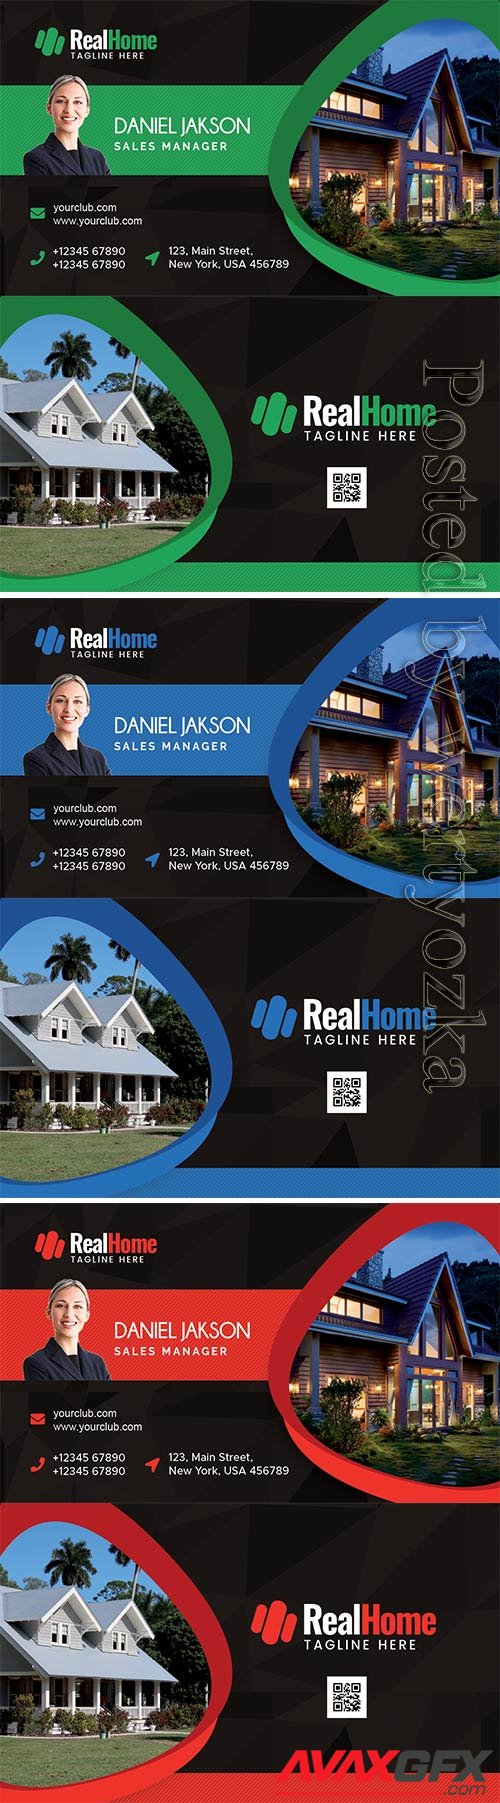 Real Estate Company Business Card PSD